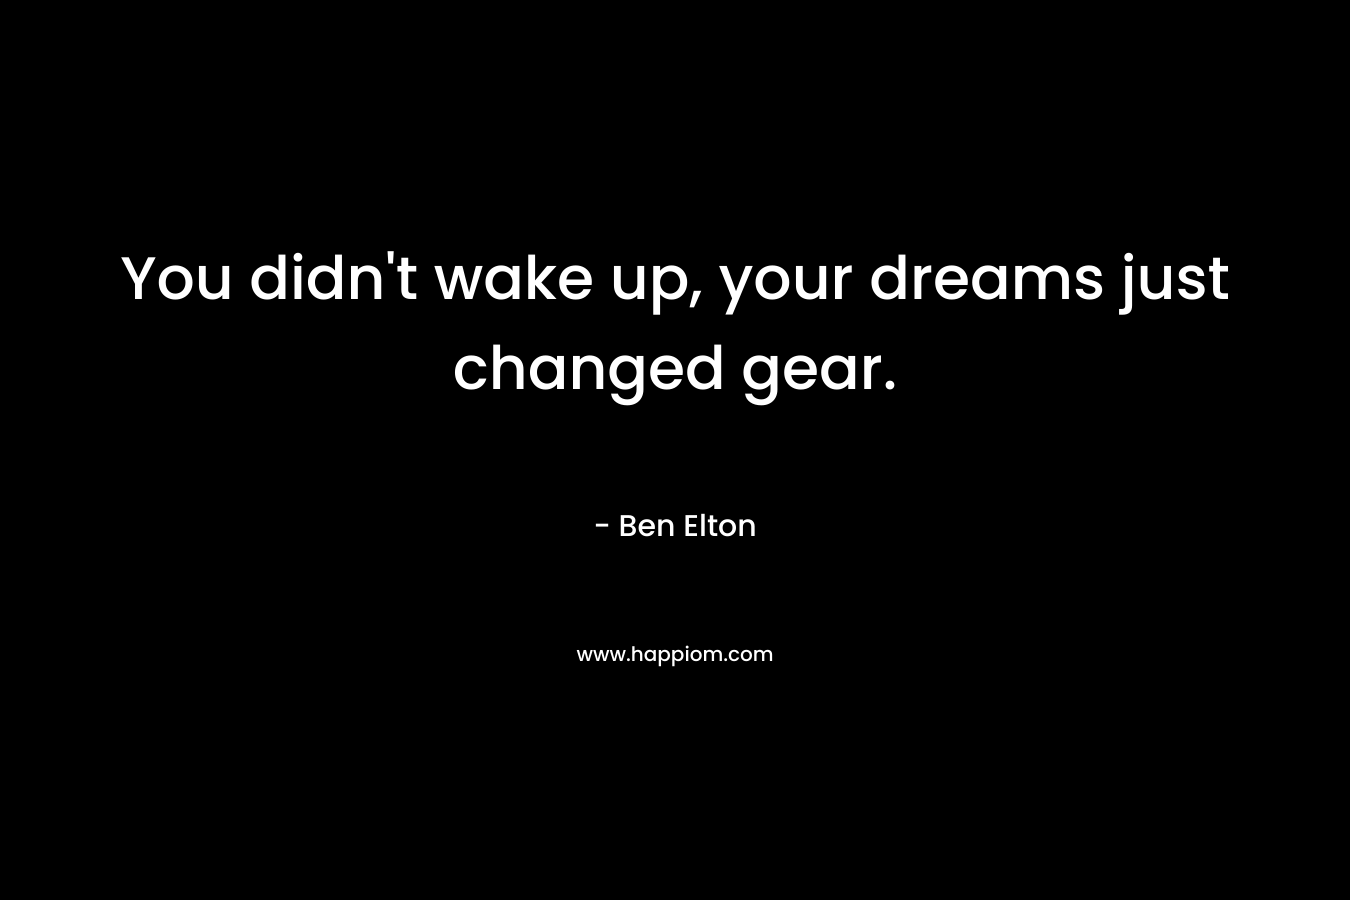 You didn't wake up, your dreams just changed gear.